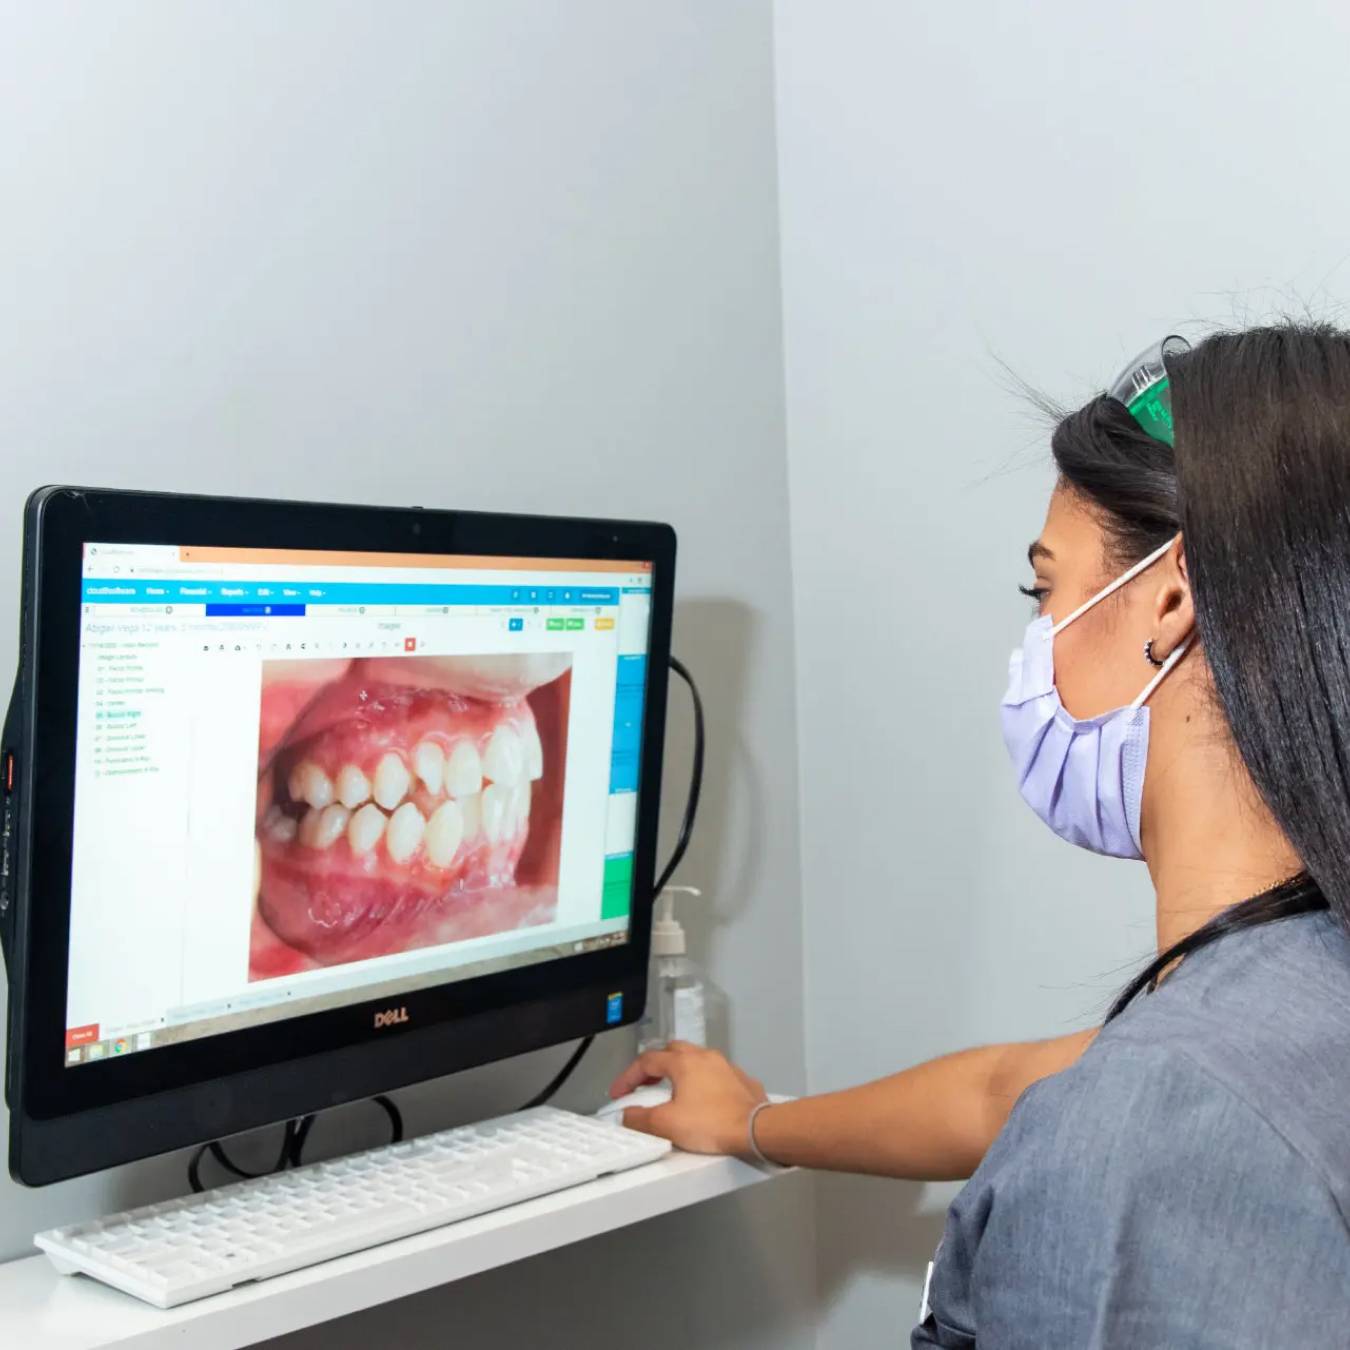 Team member examining a patients teetho on the computer